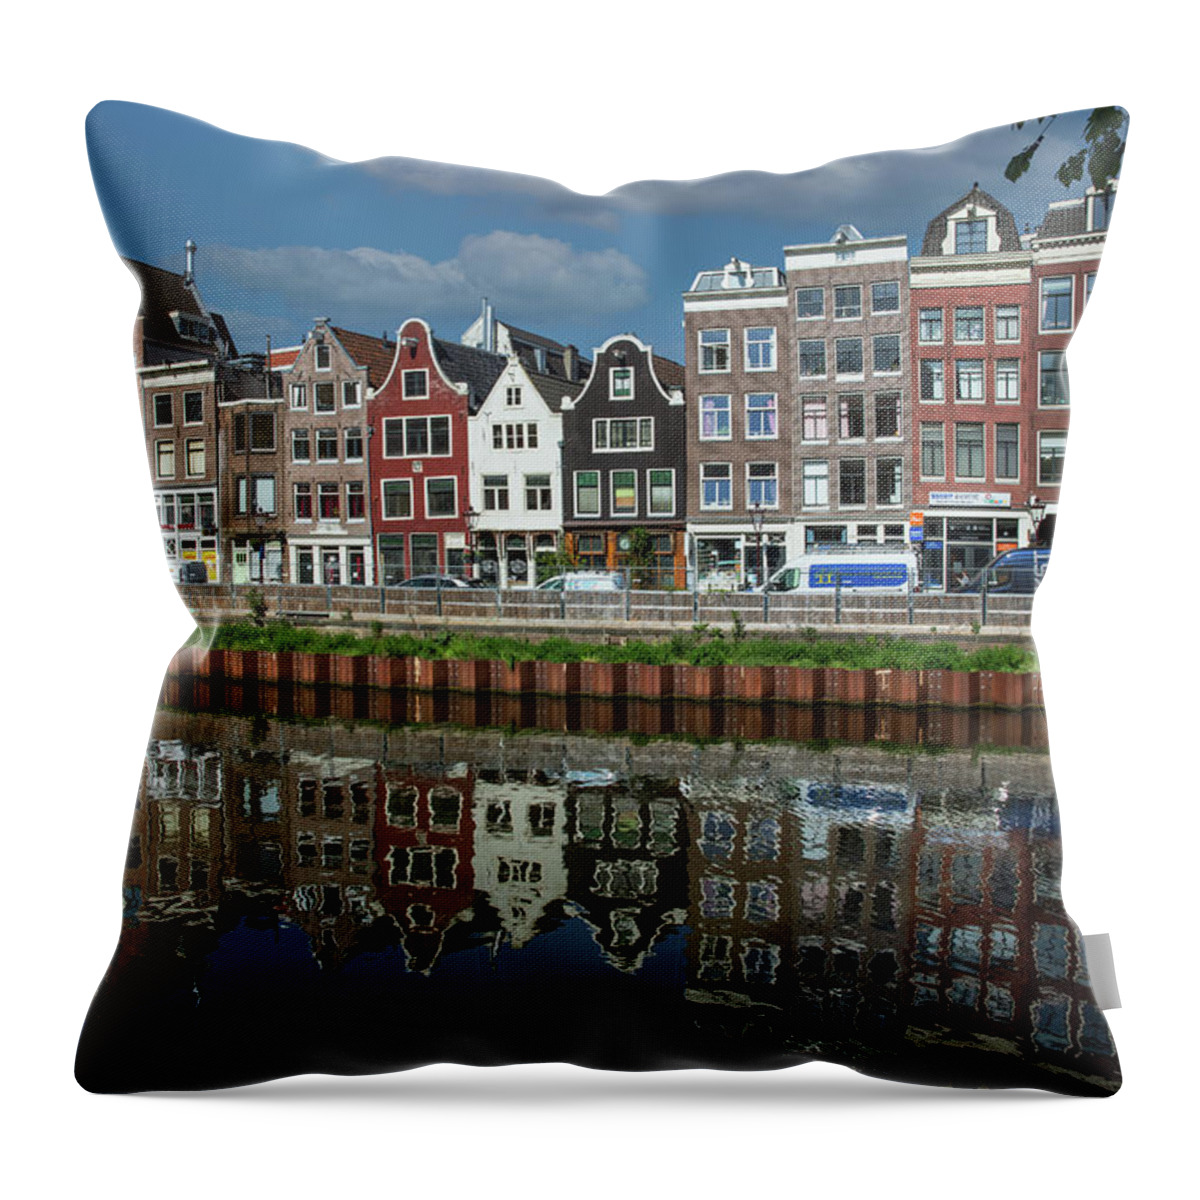 Amsterdam Reflections Throw Pillow featuring the photograph Amsterdam Reflections by John Haldane